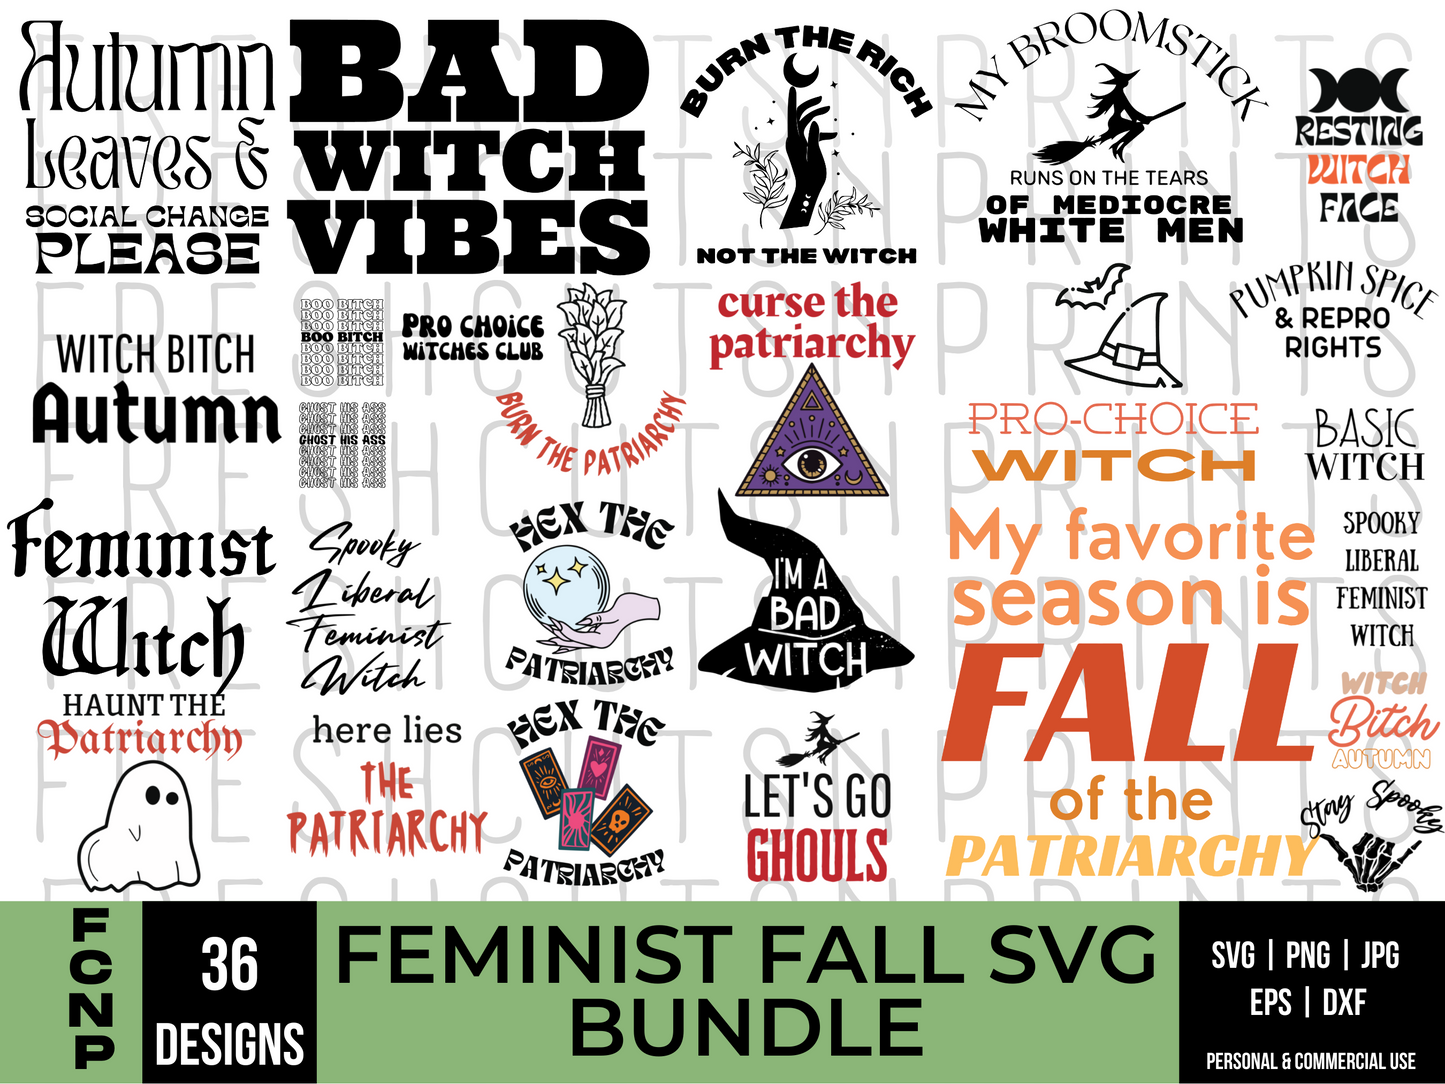 Feminist Fall SVG Bundle, Pro Choice svg, Fall svg, Halloween Feminist svg, Funny Pro Choice svg, Bad Witch svg, Pro Choice Witch png